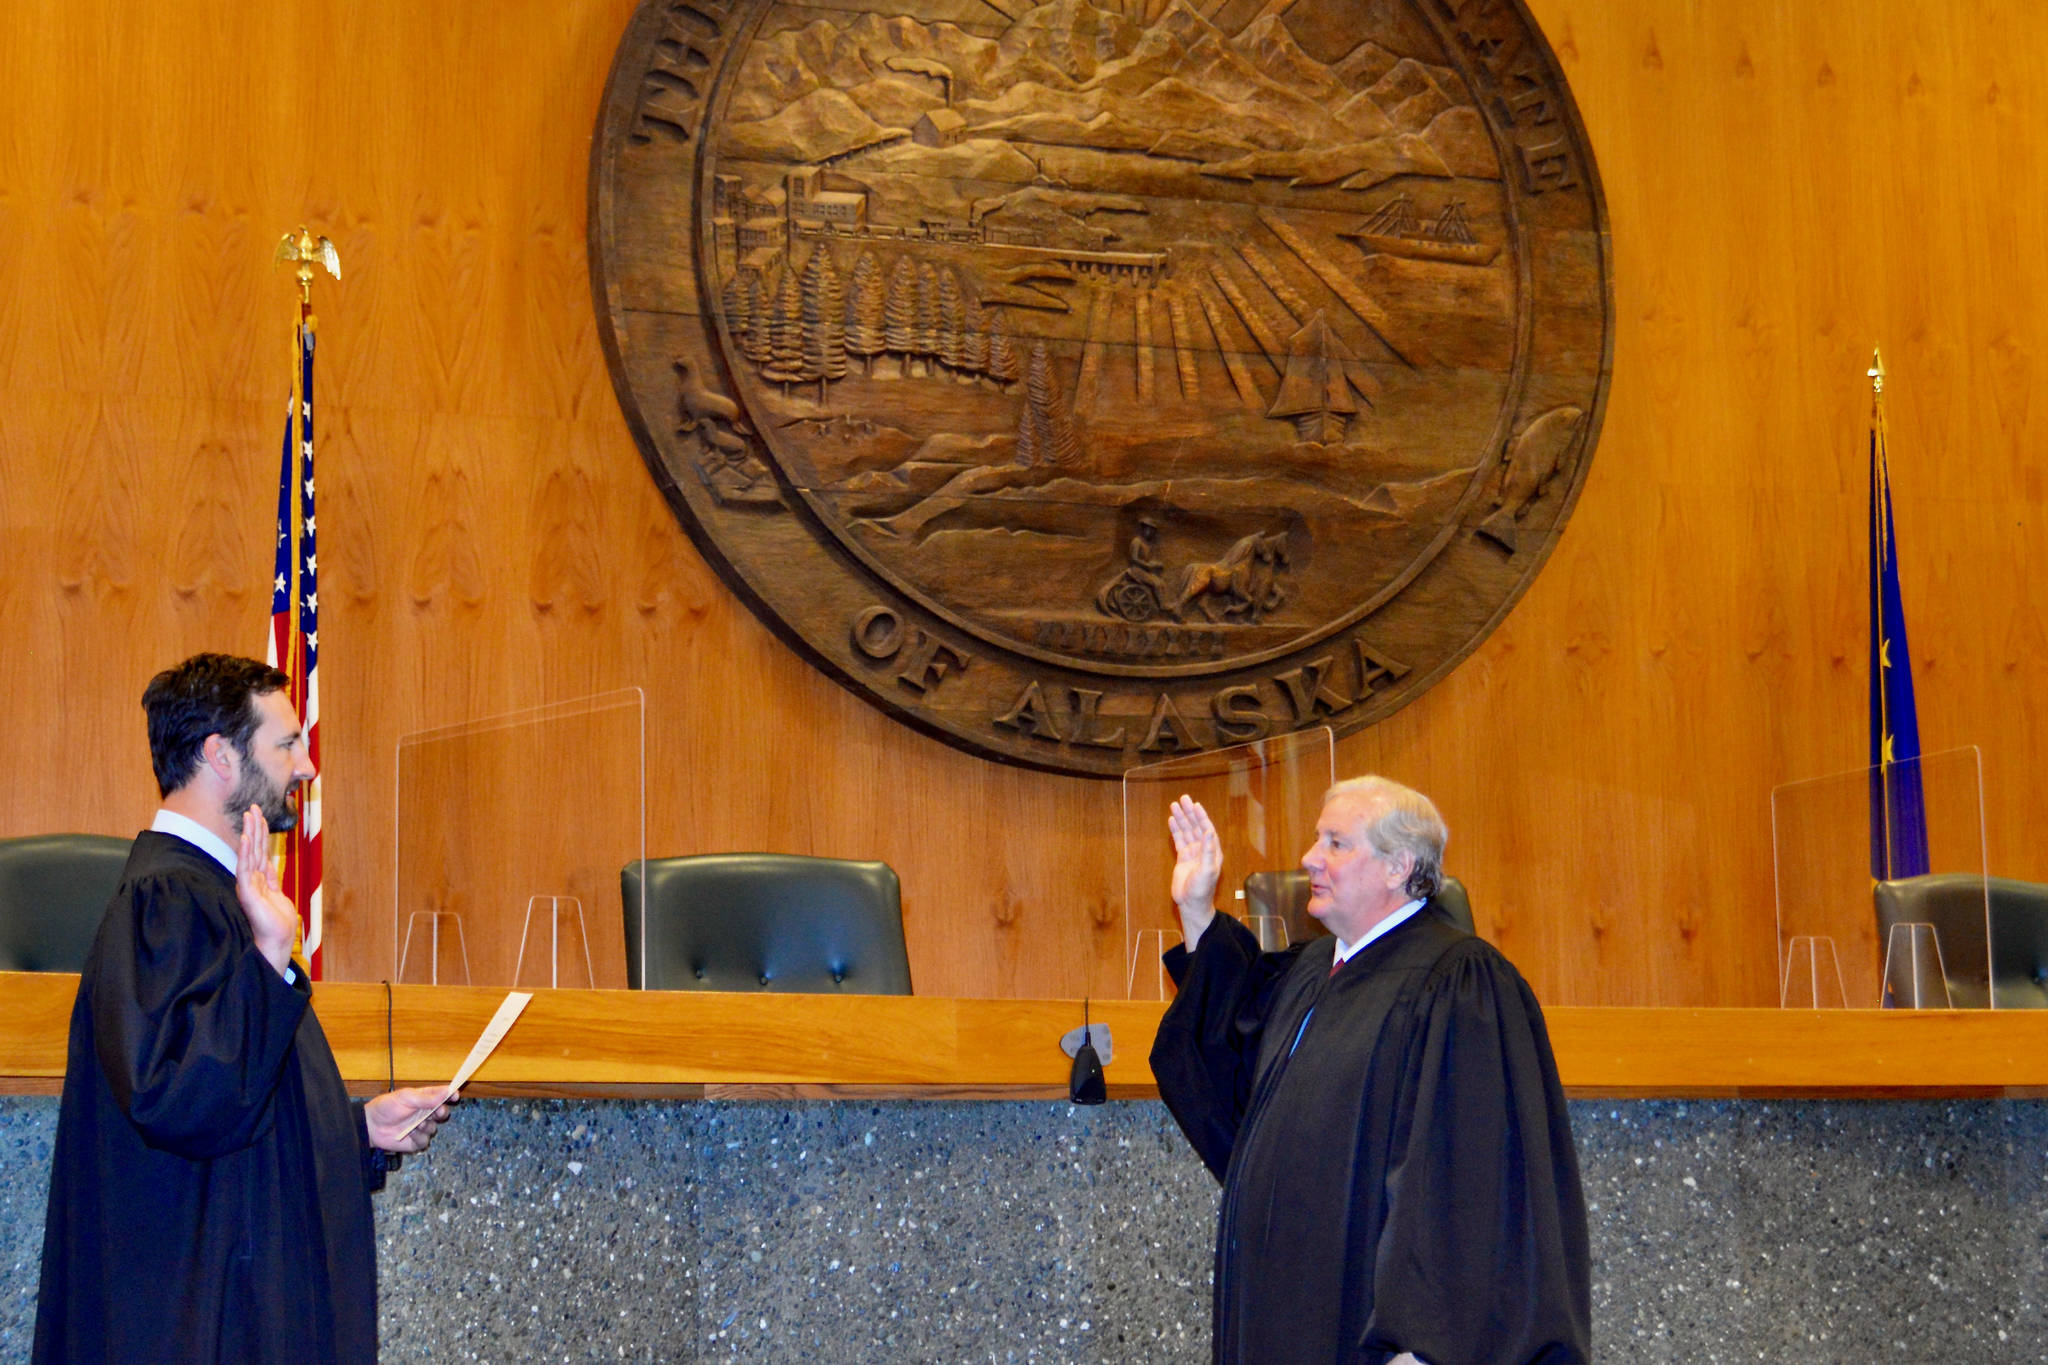 Chief Justice Daniel E. Winfree, right, is sword in by Justice Dario Borghesan in Anchorage on July 1, 2021. Winfree will take over after former Chief Justice Joel Bolger retired earlier this year. (Courtesy photo / Alaska Court System)